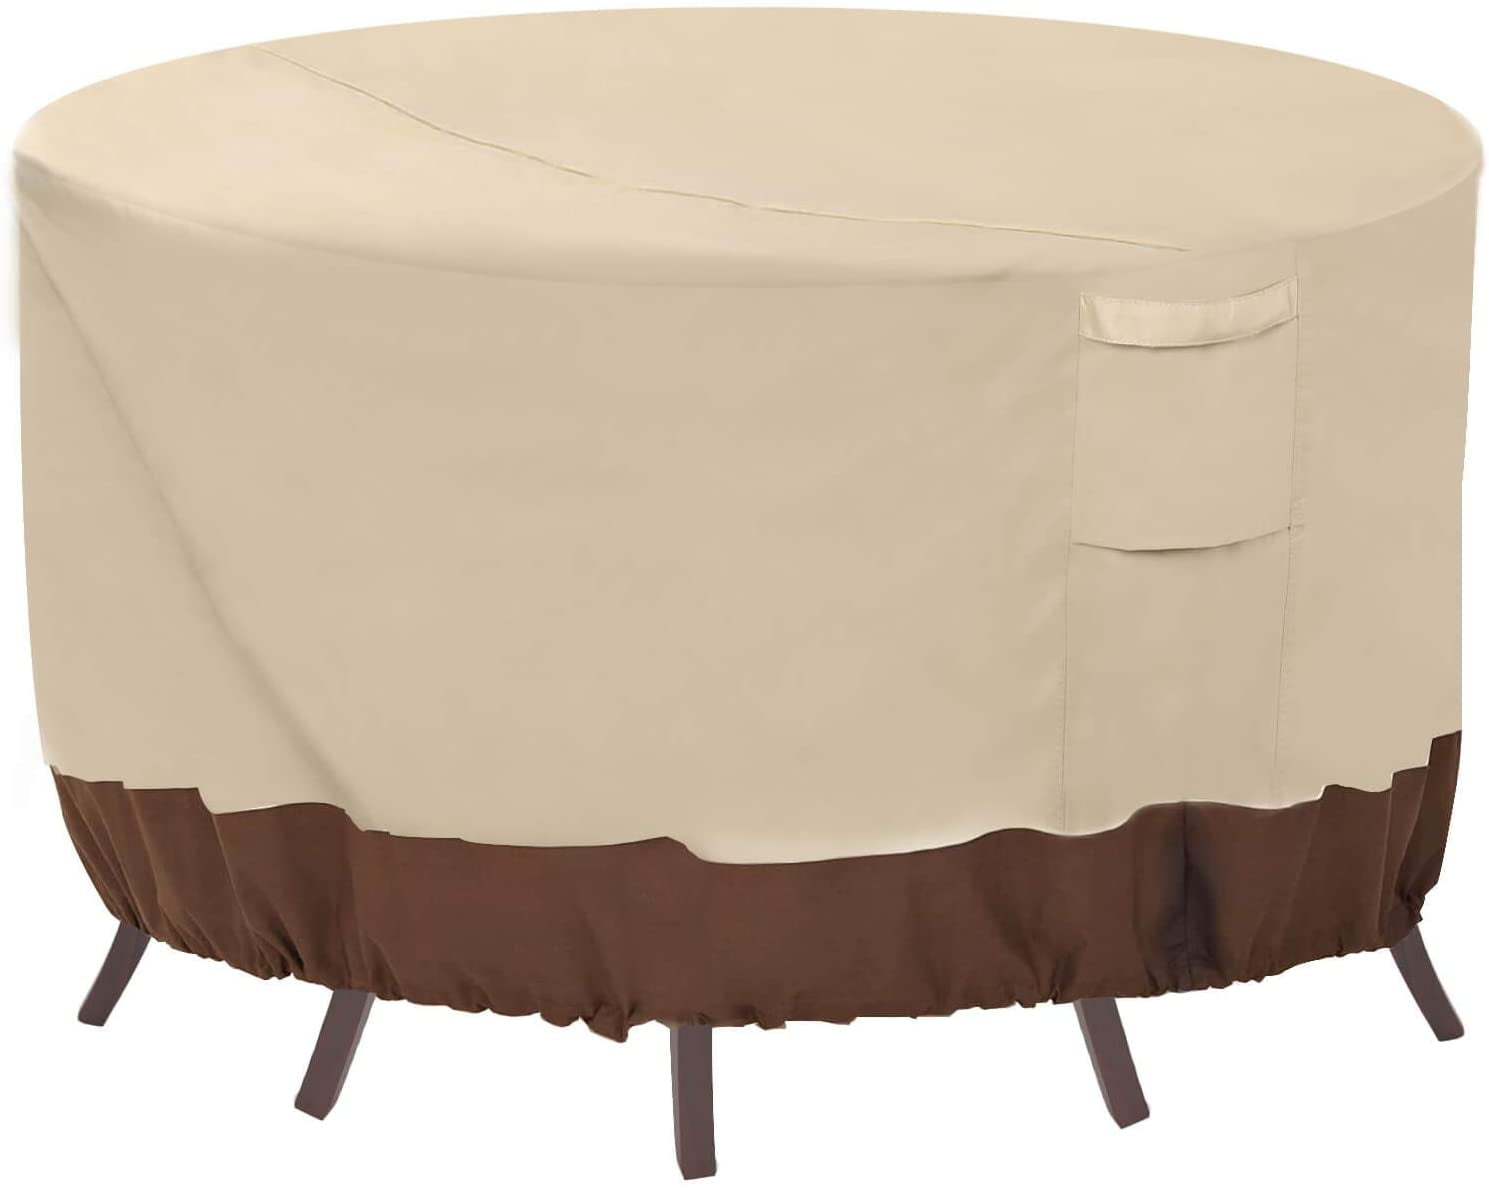 NettyPro Waterproof Side Table Cover Square 20 x 20 Inch Outdoor Patio Furniture Ottoman Table Cover Brown 